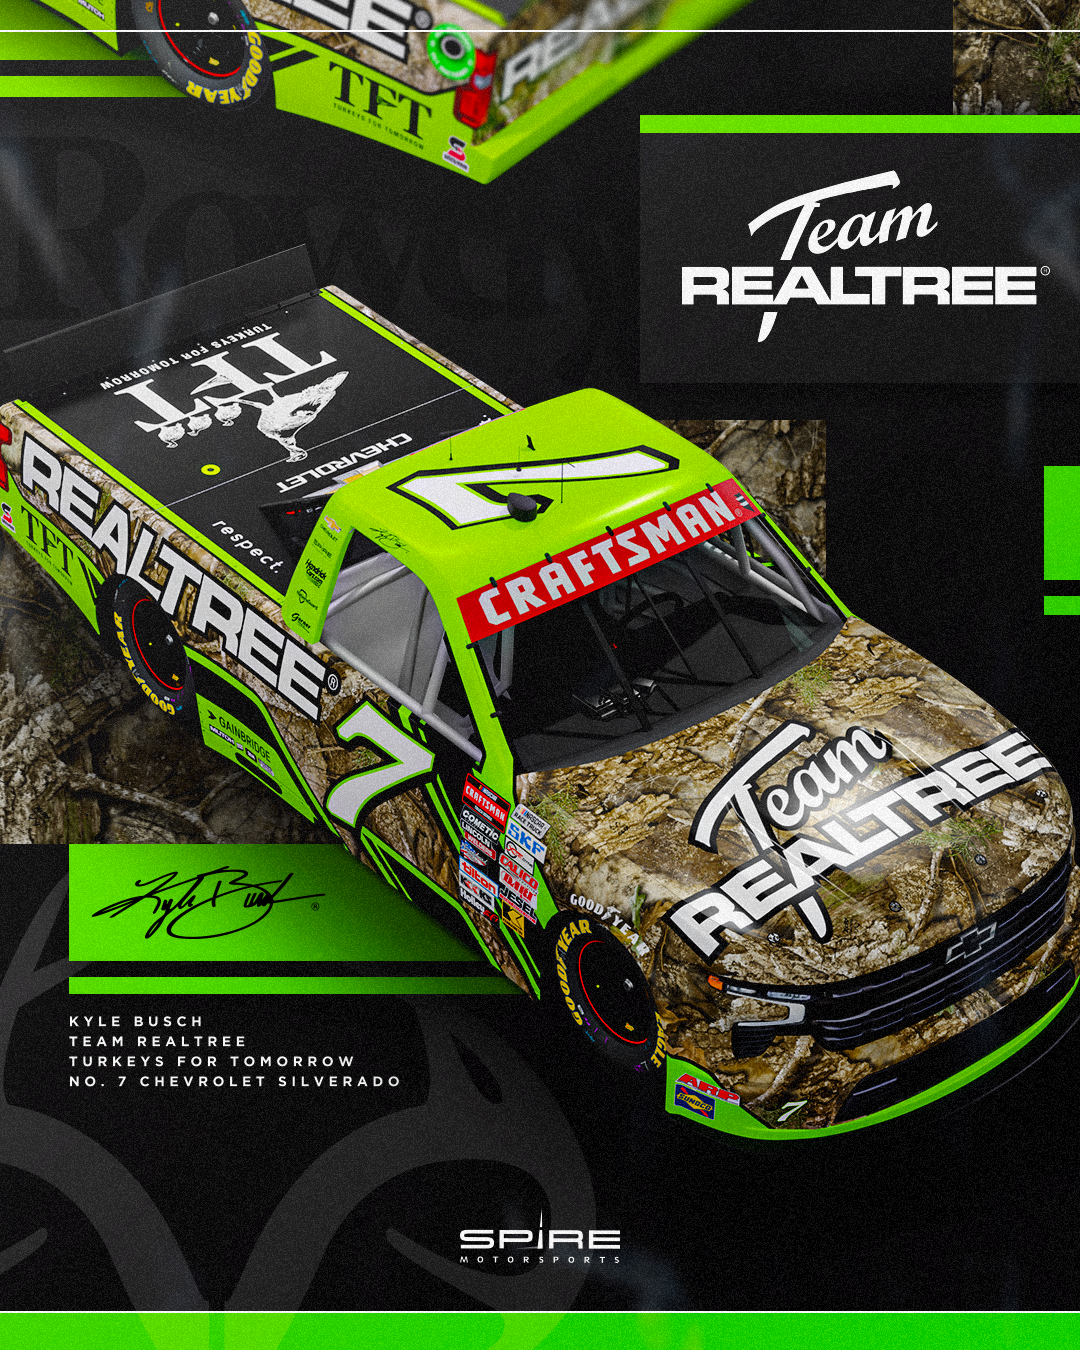 REALTREE, TURKEYS FOR TOMORROW JOIN KYLE BUSCH, SPIRE MOTORSPORTS FOR TEXAS NCTS RACE